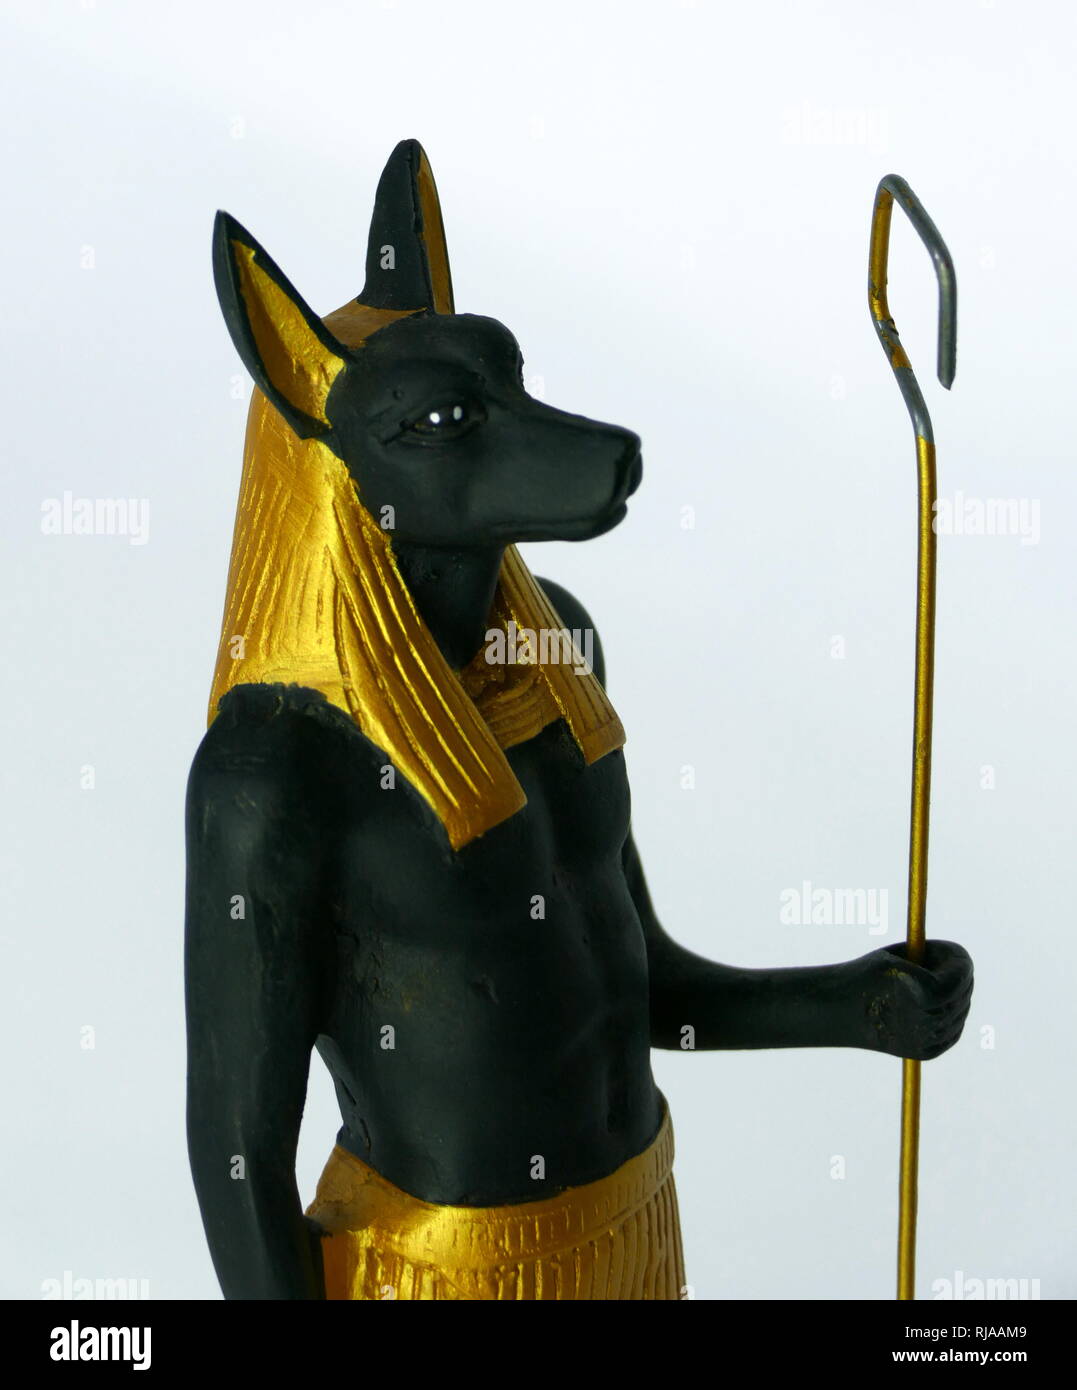 Modern replica statuette of Anubis the god associated with mummification and the afterlife in ancient Egyptian religion. usually depicted as a canine or a man with a canine head. Archaeologists identified the sacred animal of Anubis as an Egyptian canid, that at the time was called the golden jackal, but recent genetic testing has caused the Egyptian animal to be reclassified as the African golden wolf. Stock Photo